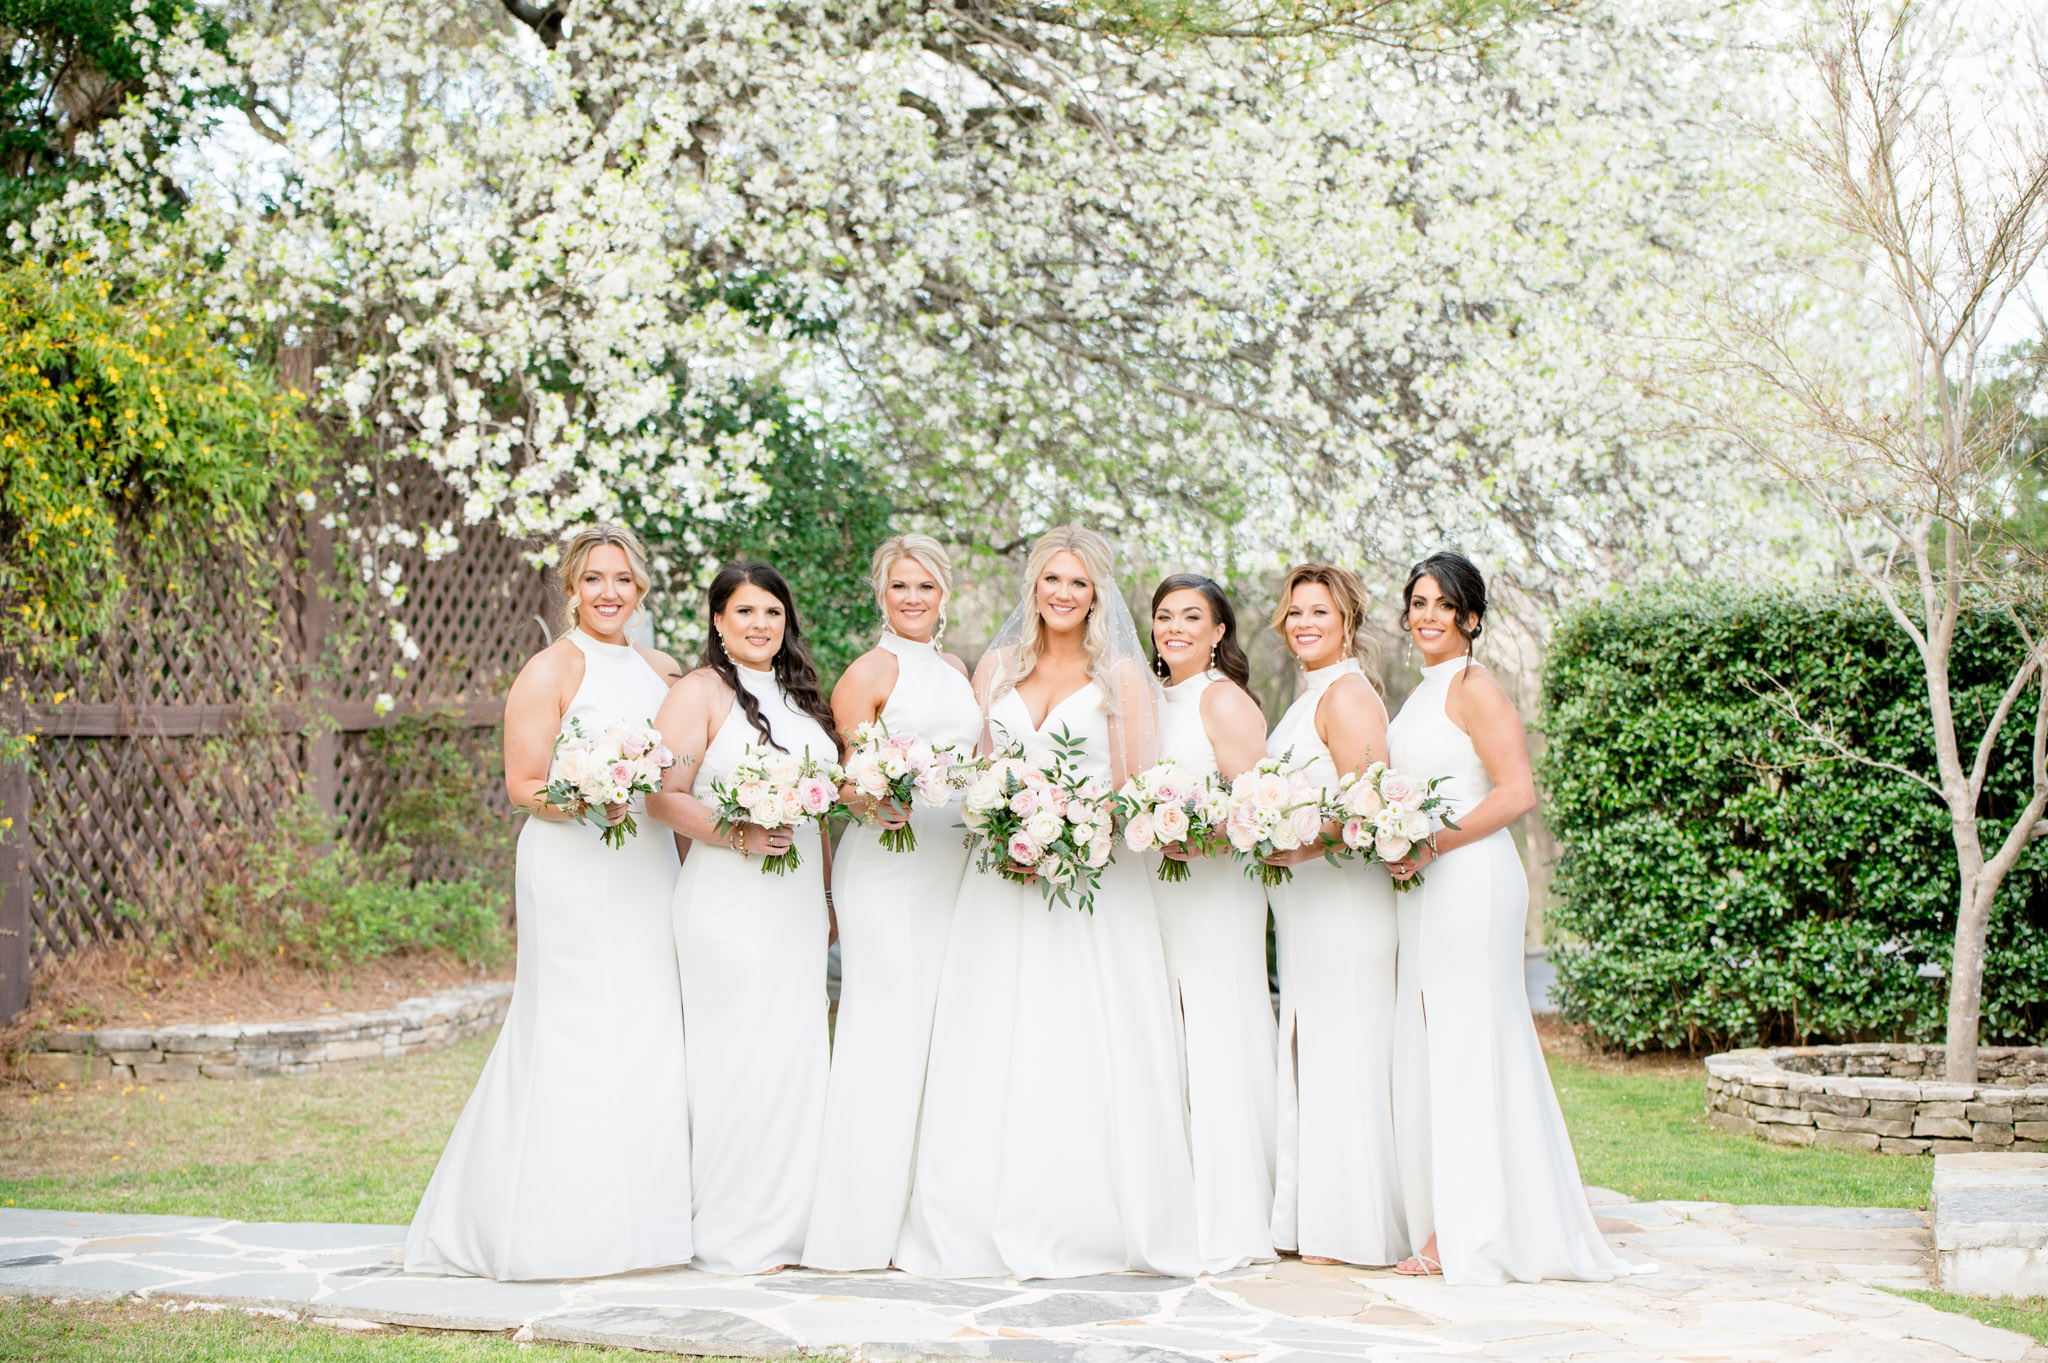 Bride and bridesmaids smile for portraits.